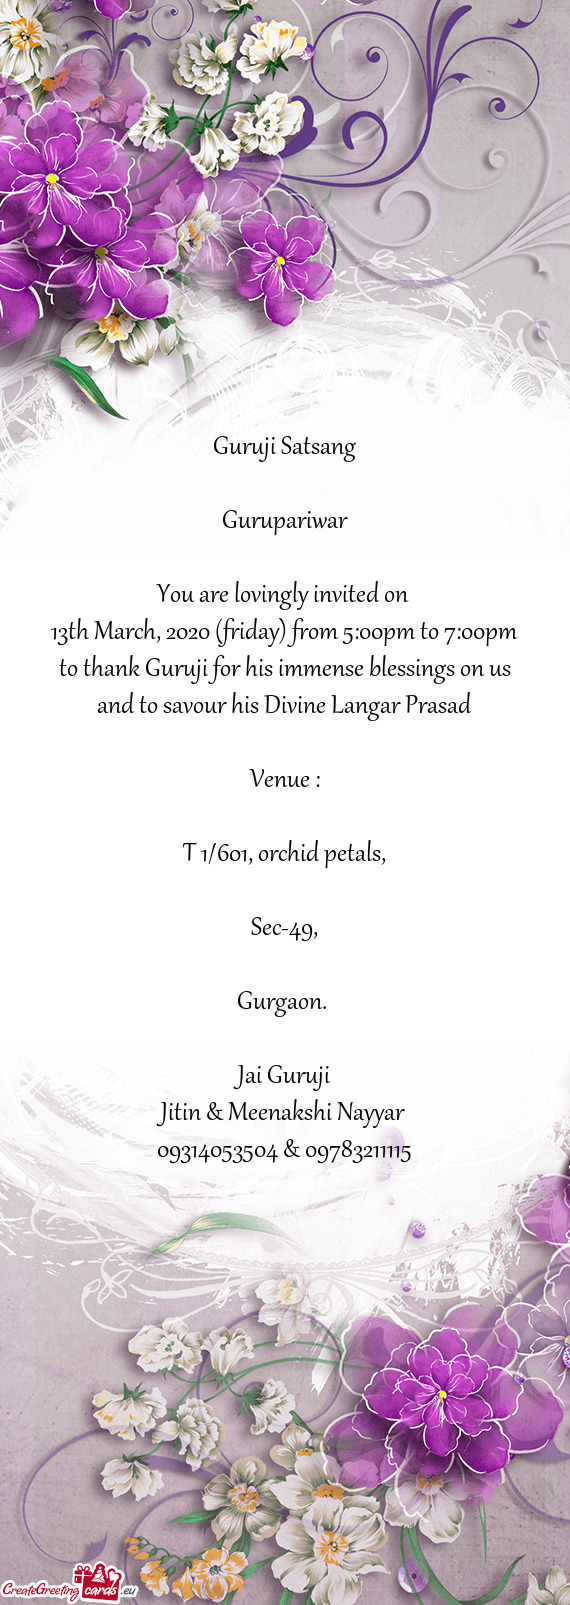 13th March, 2020 (friday) from 5:00pm to 7:00pm